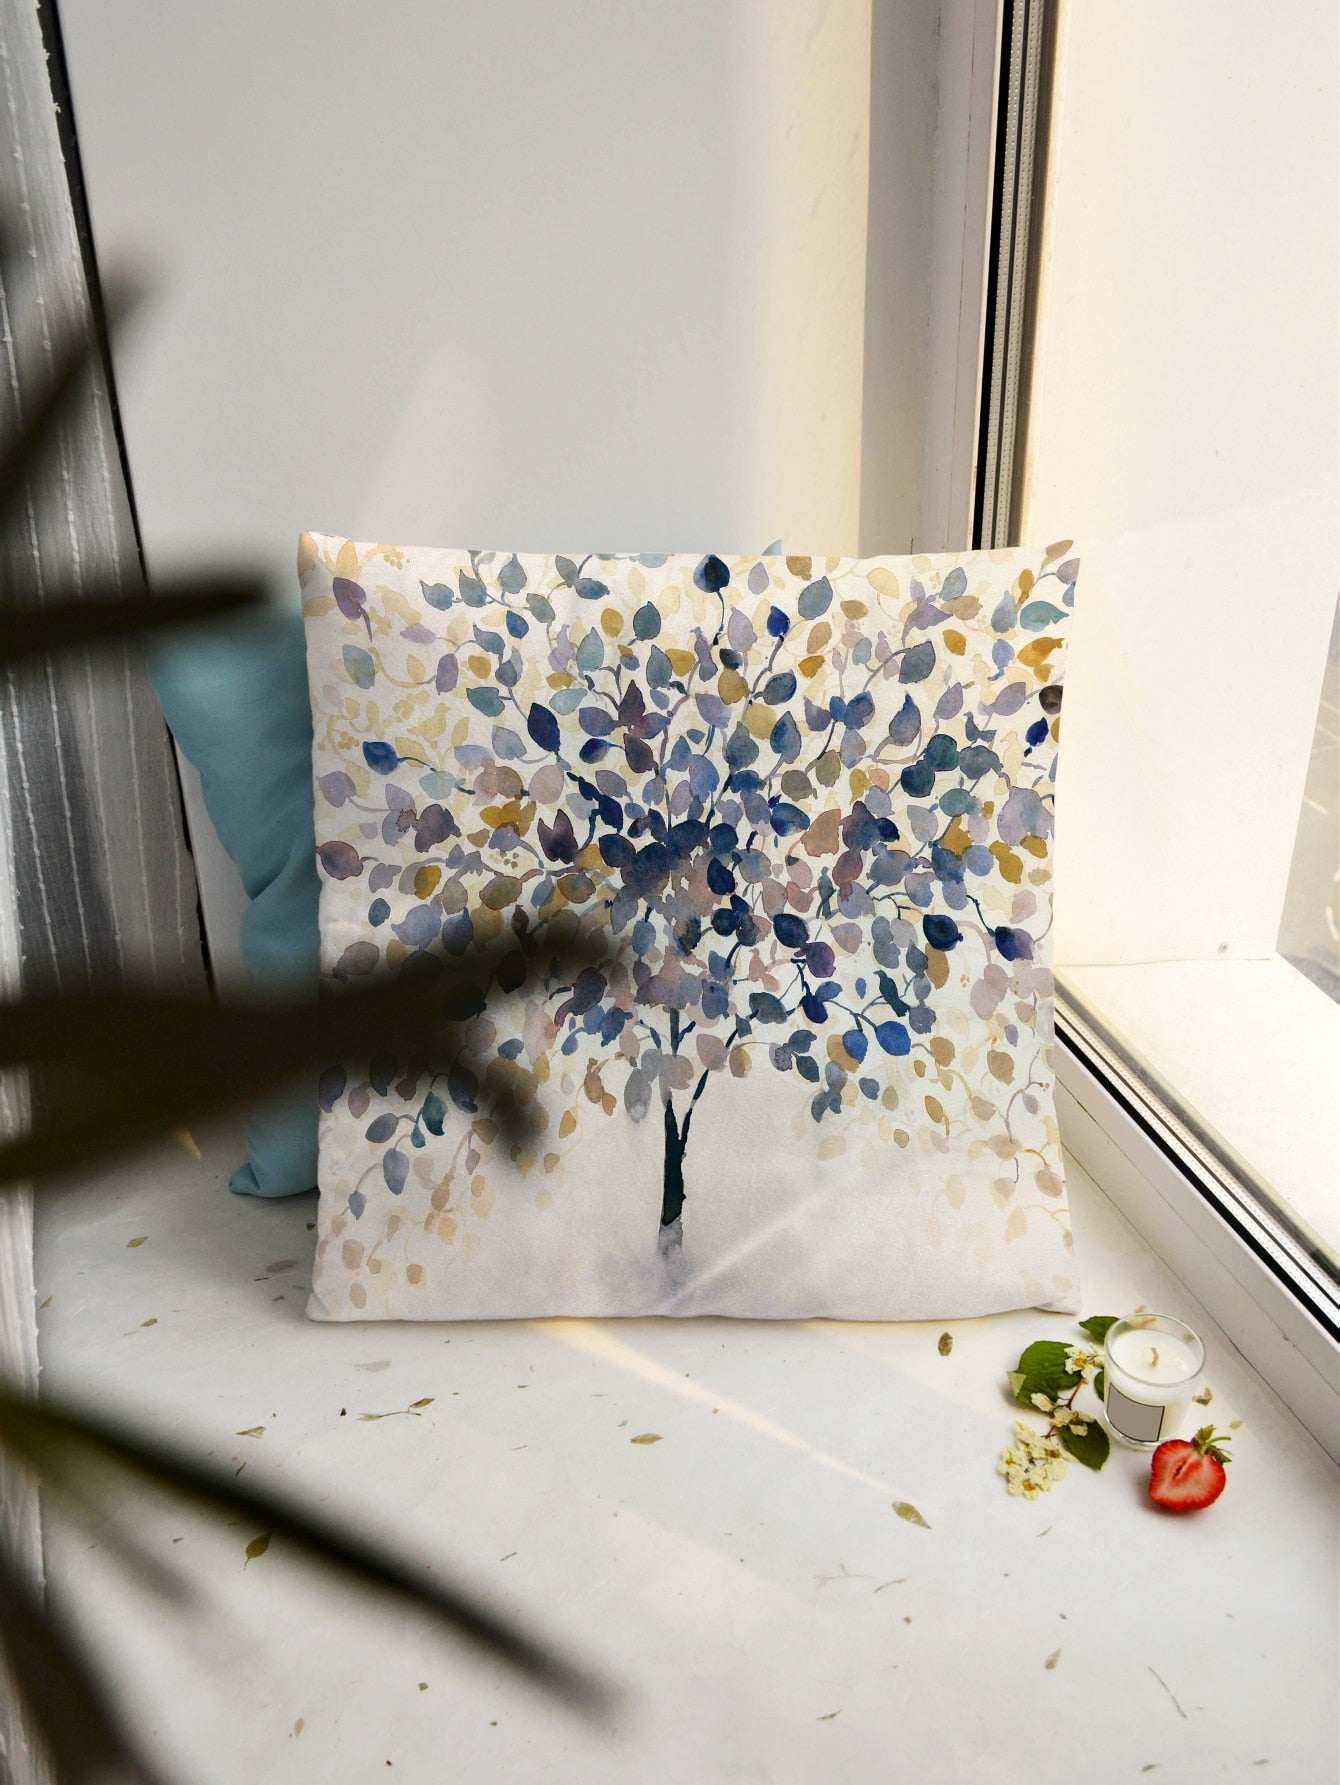 Tree Print Cushion Cover Without Filler